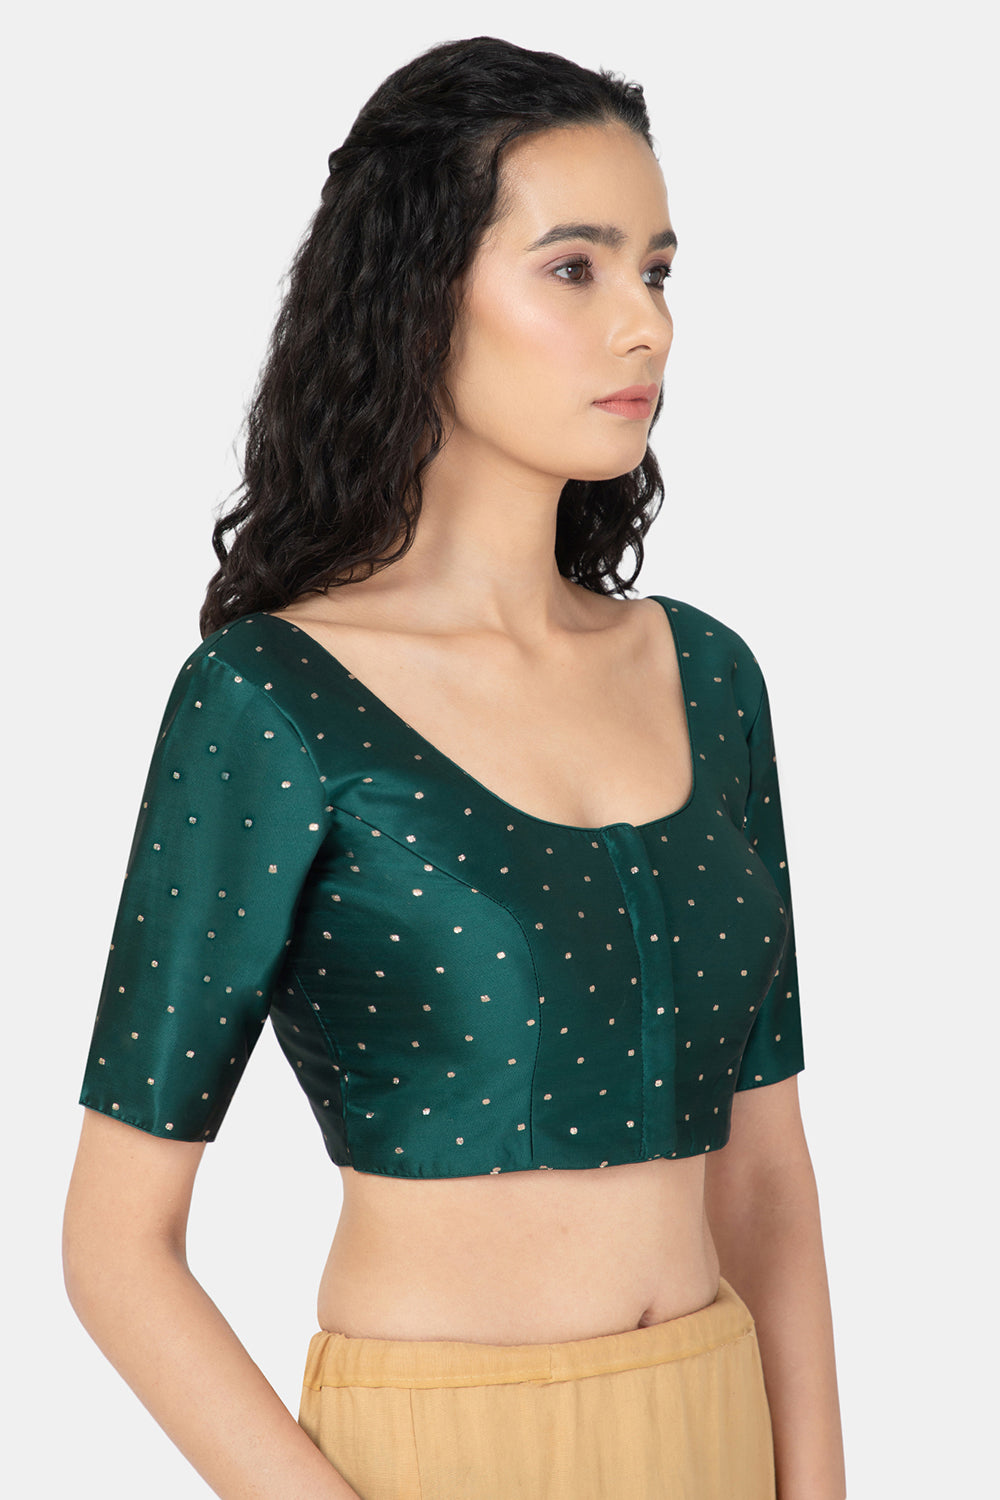 Naidu Hall Ethnic Jacquard Saree Blouse with Round Neck Elbow Sleeves - Bottle Green